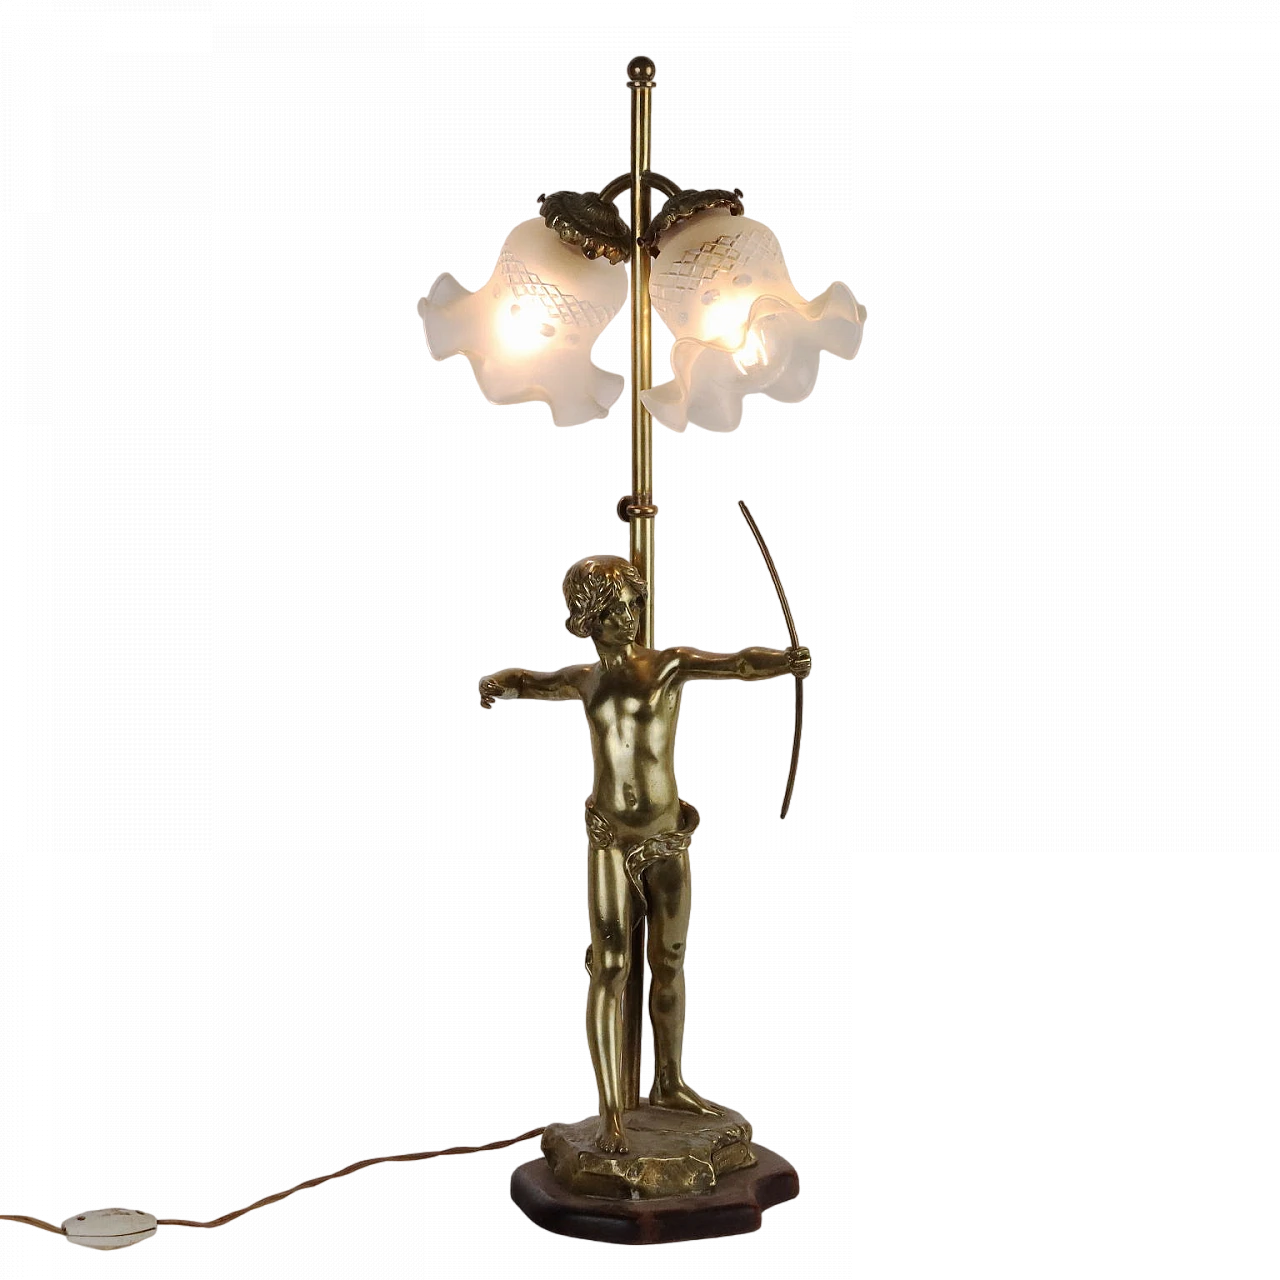 Table lamp with bronze sculpture & glass lampshades by Scotte 11